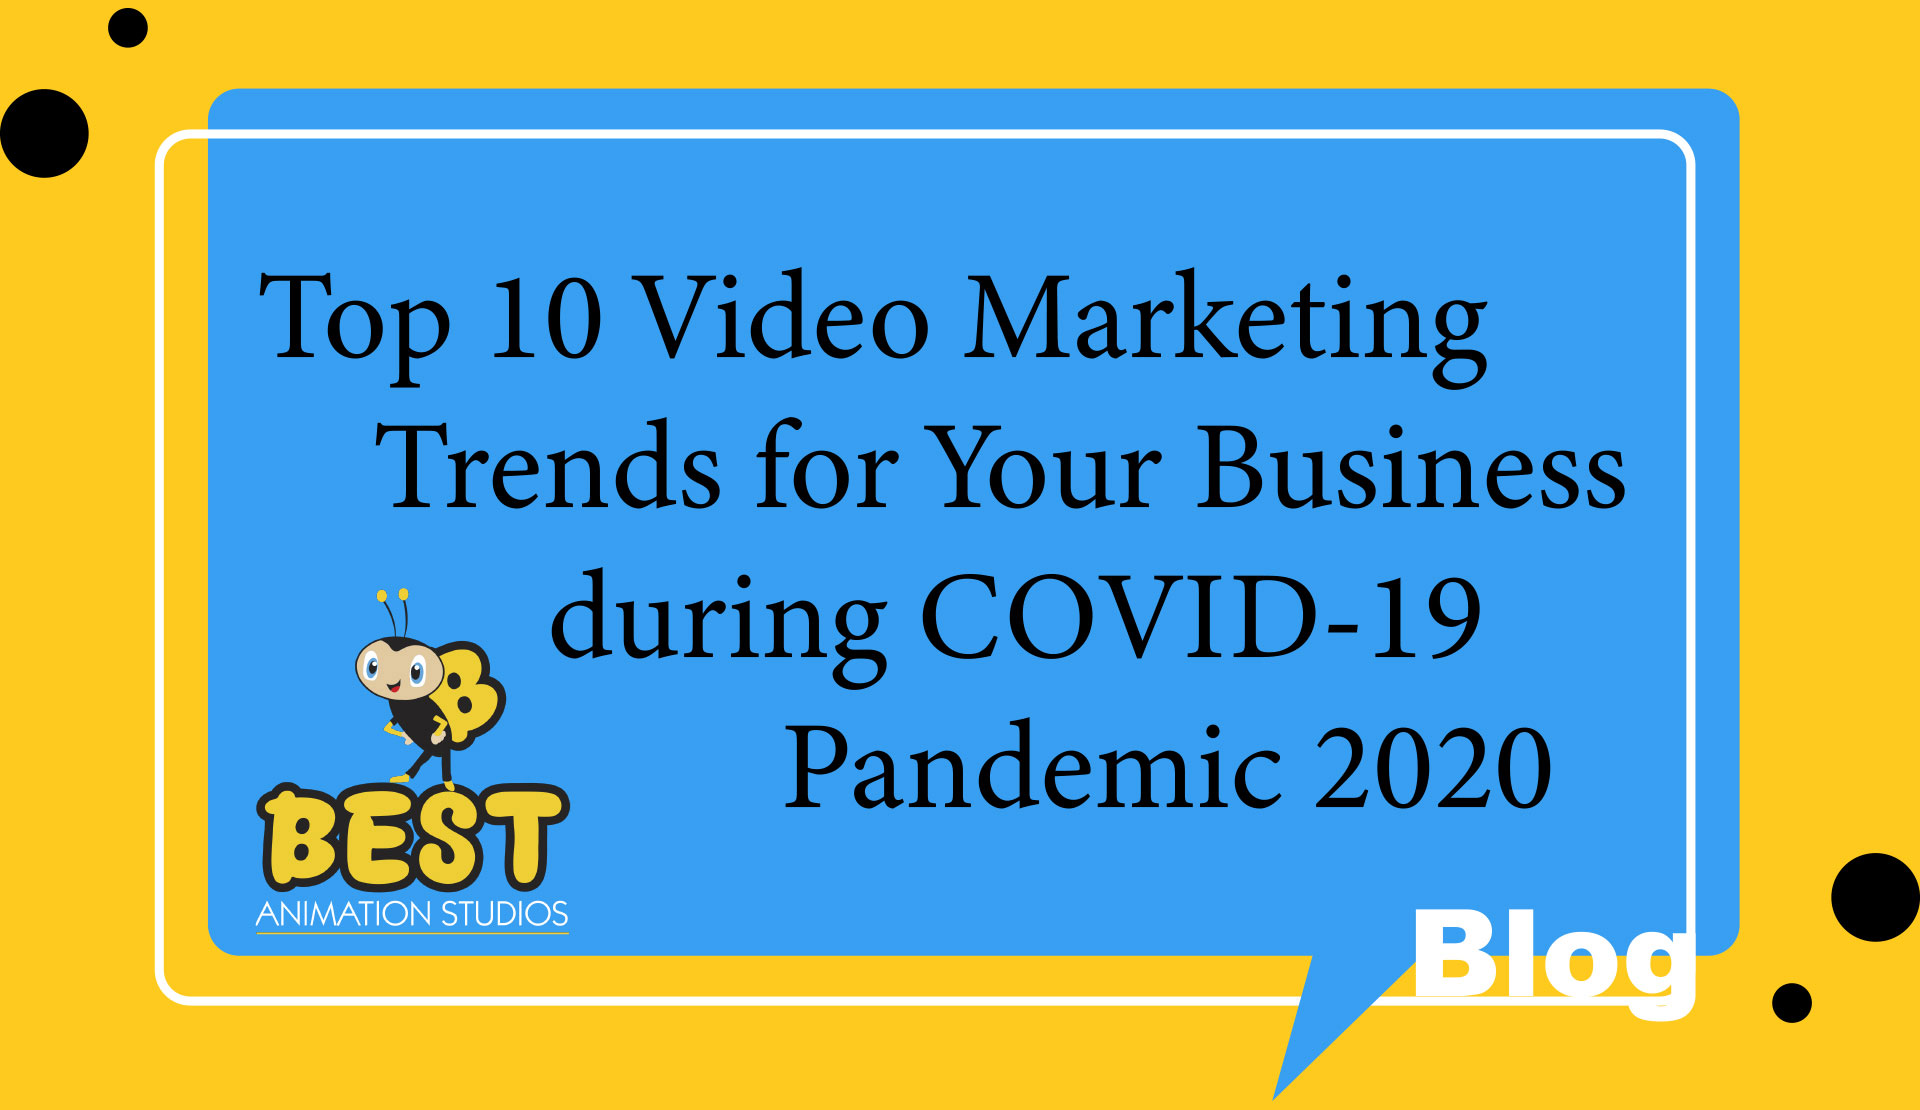 Top 10 Video Marketing Trends for Your Business during COVID-19 Pandemic 2020